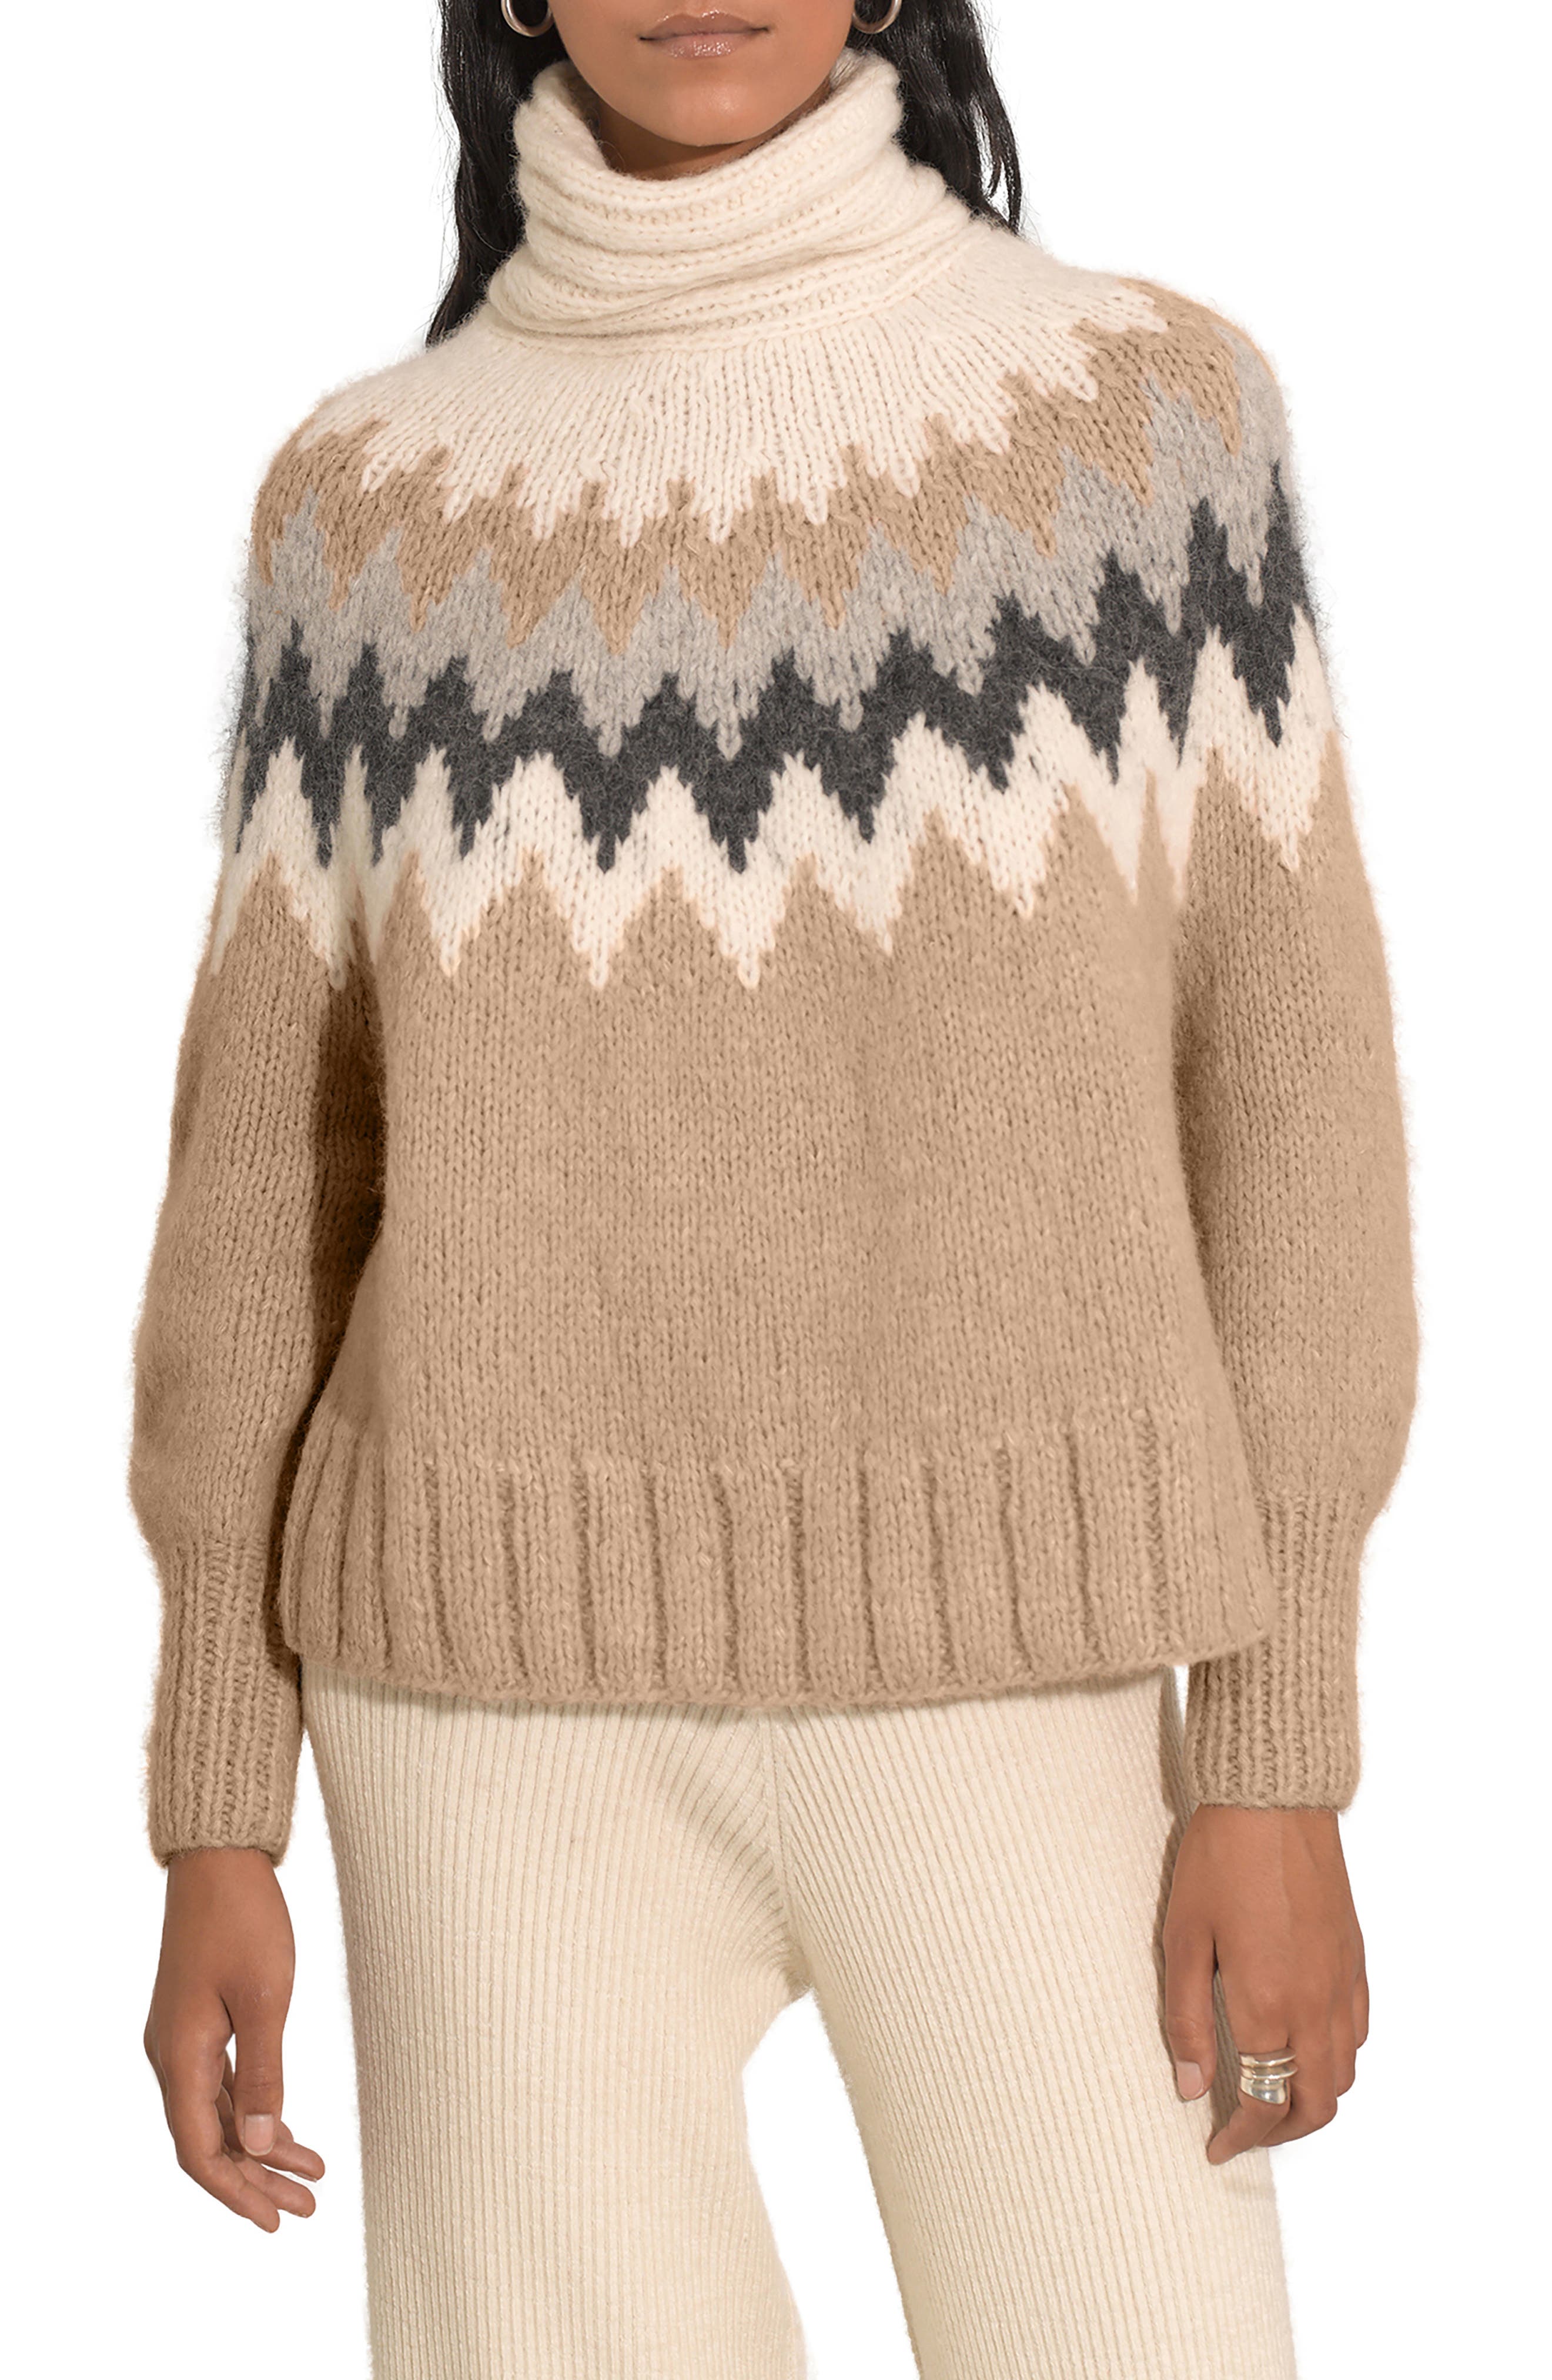 Eleven Six Magnea Turtleneck Sweater in Camel/Ivory/Grey/Graphite at Nordstrom